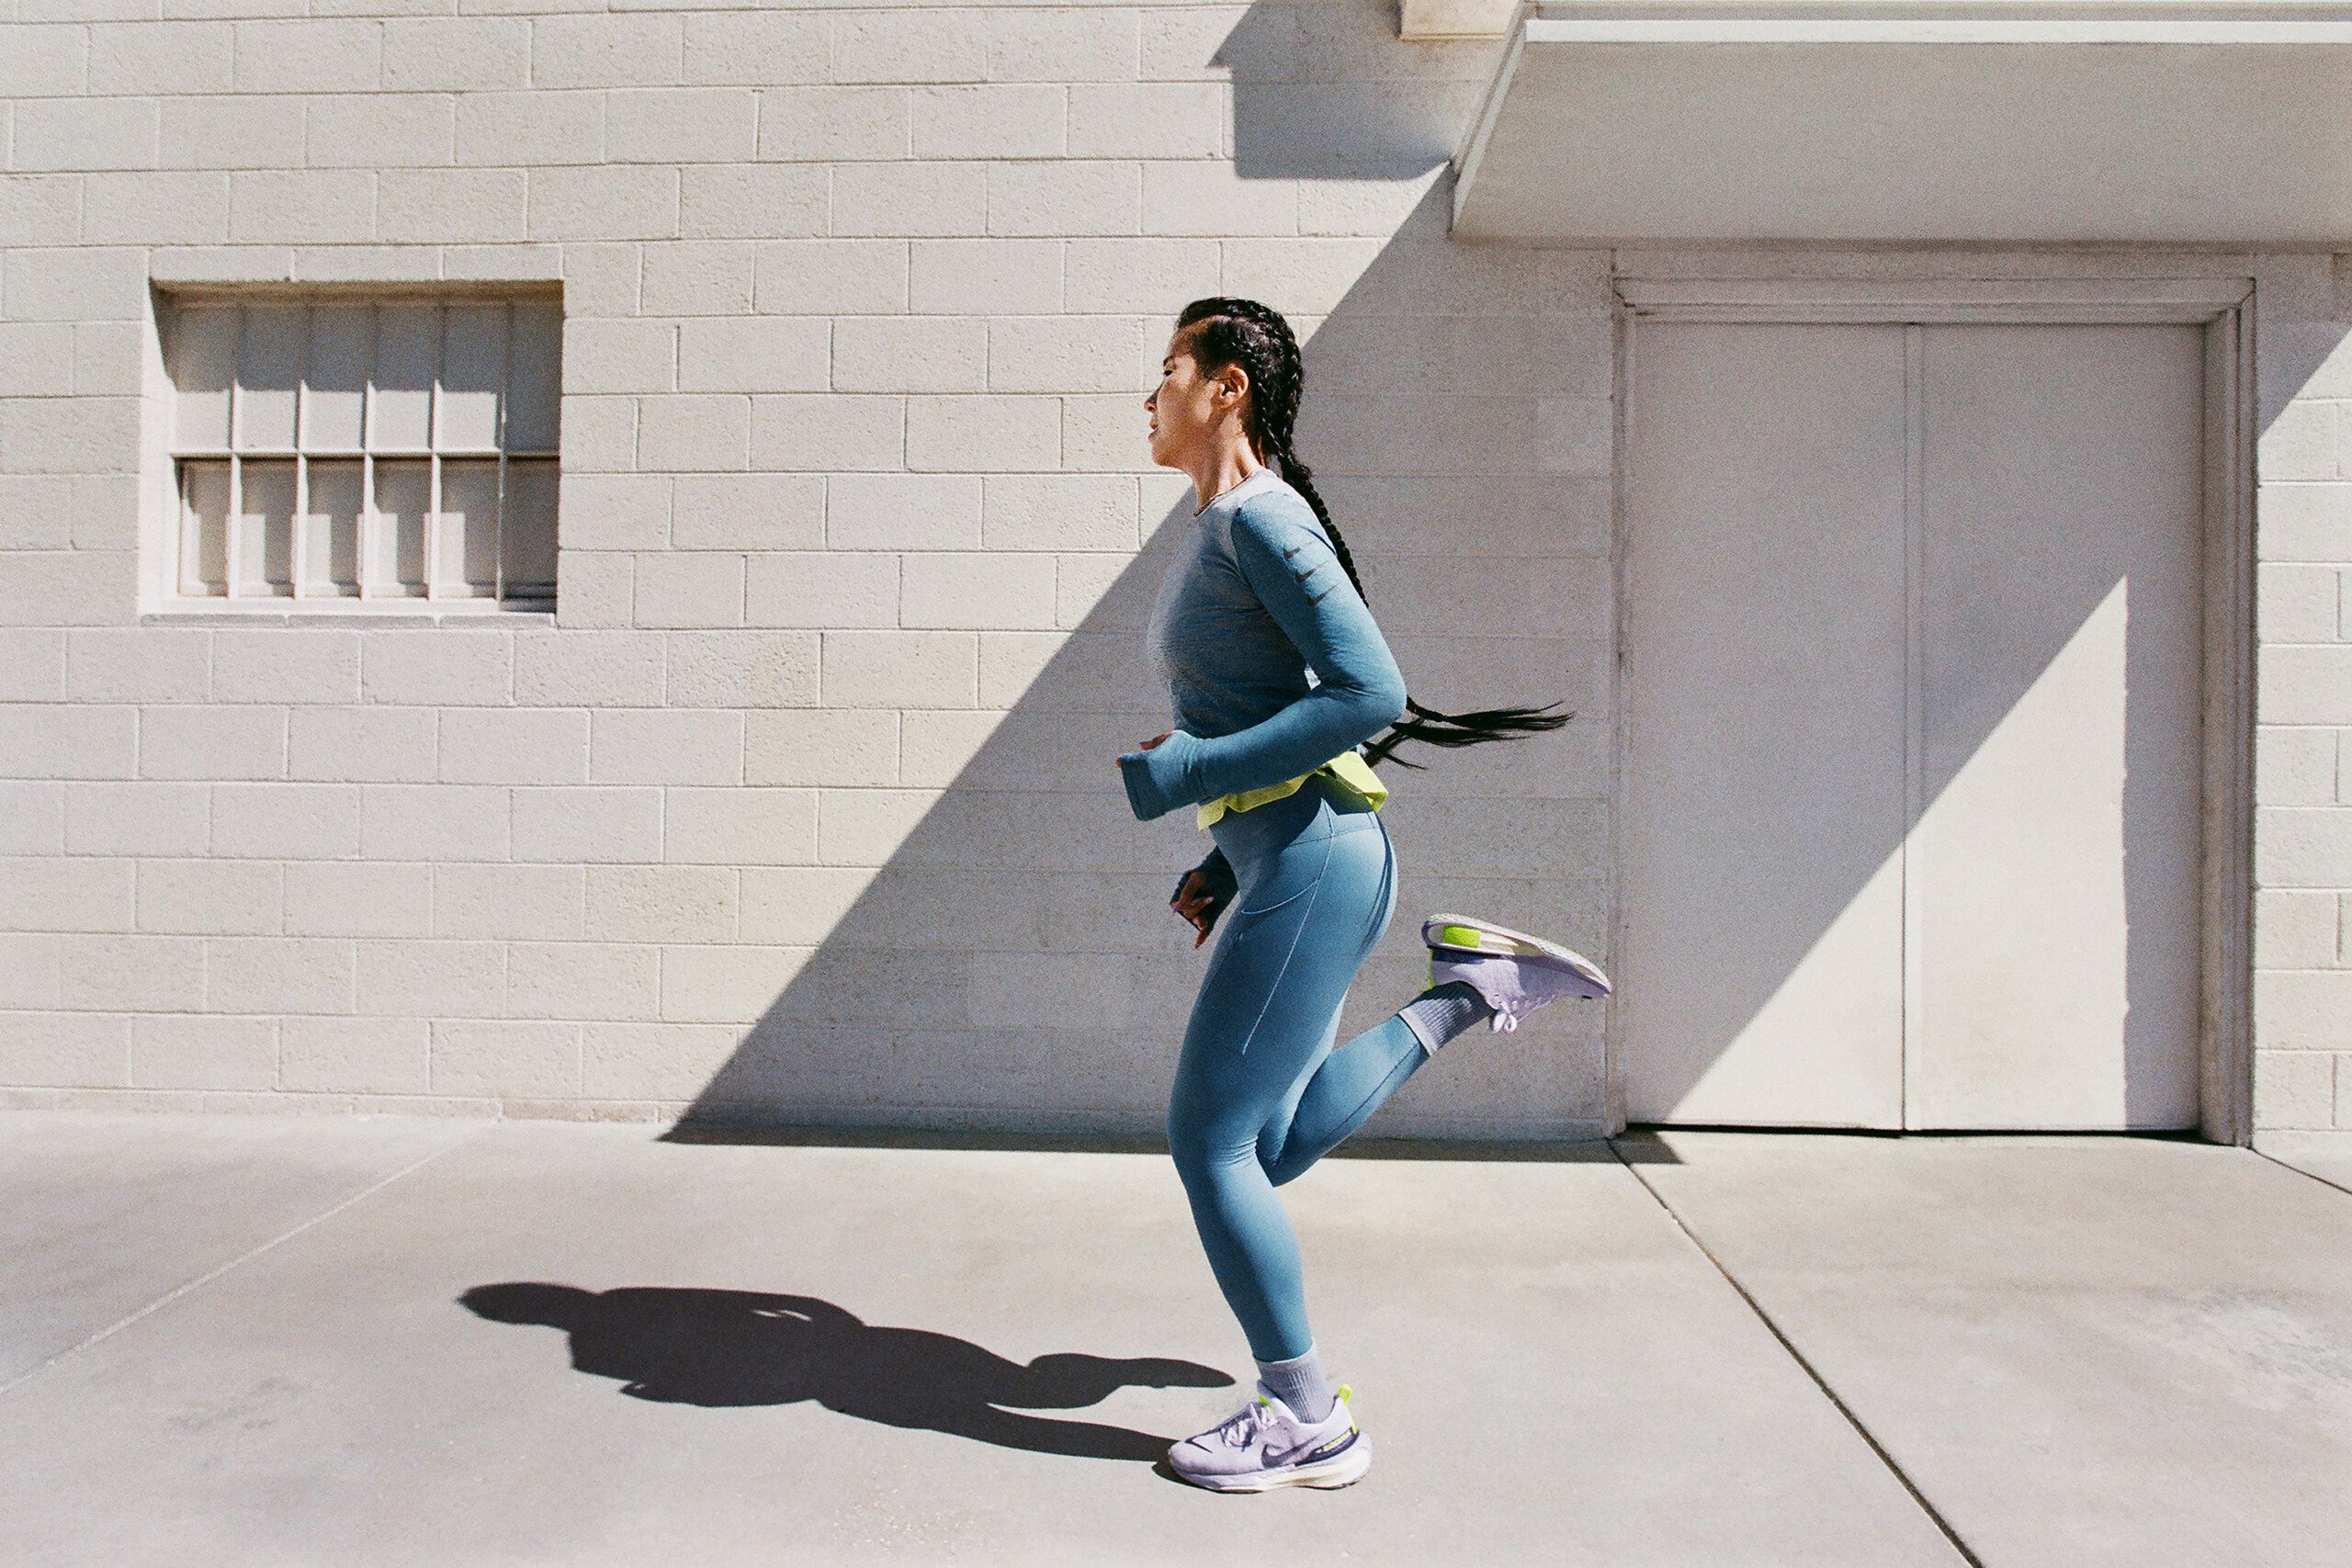 Mi Jang running in front of white building. She is wearing blue running attire with Nike Invincible 3 sneakers